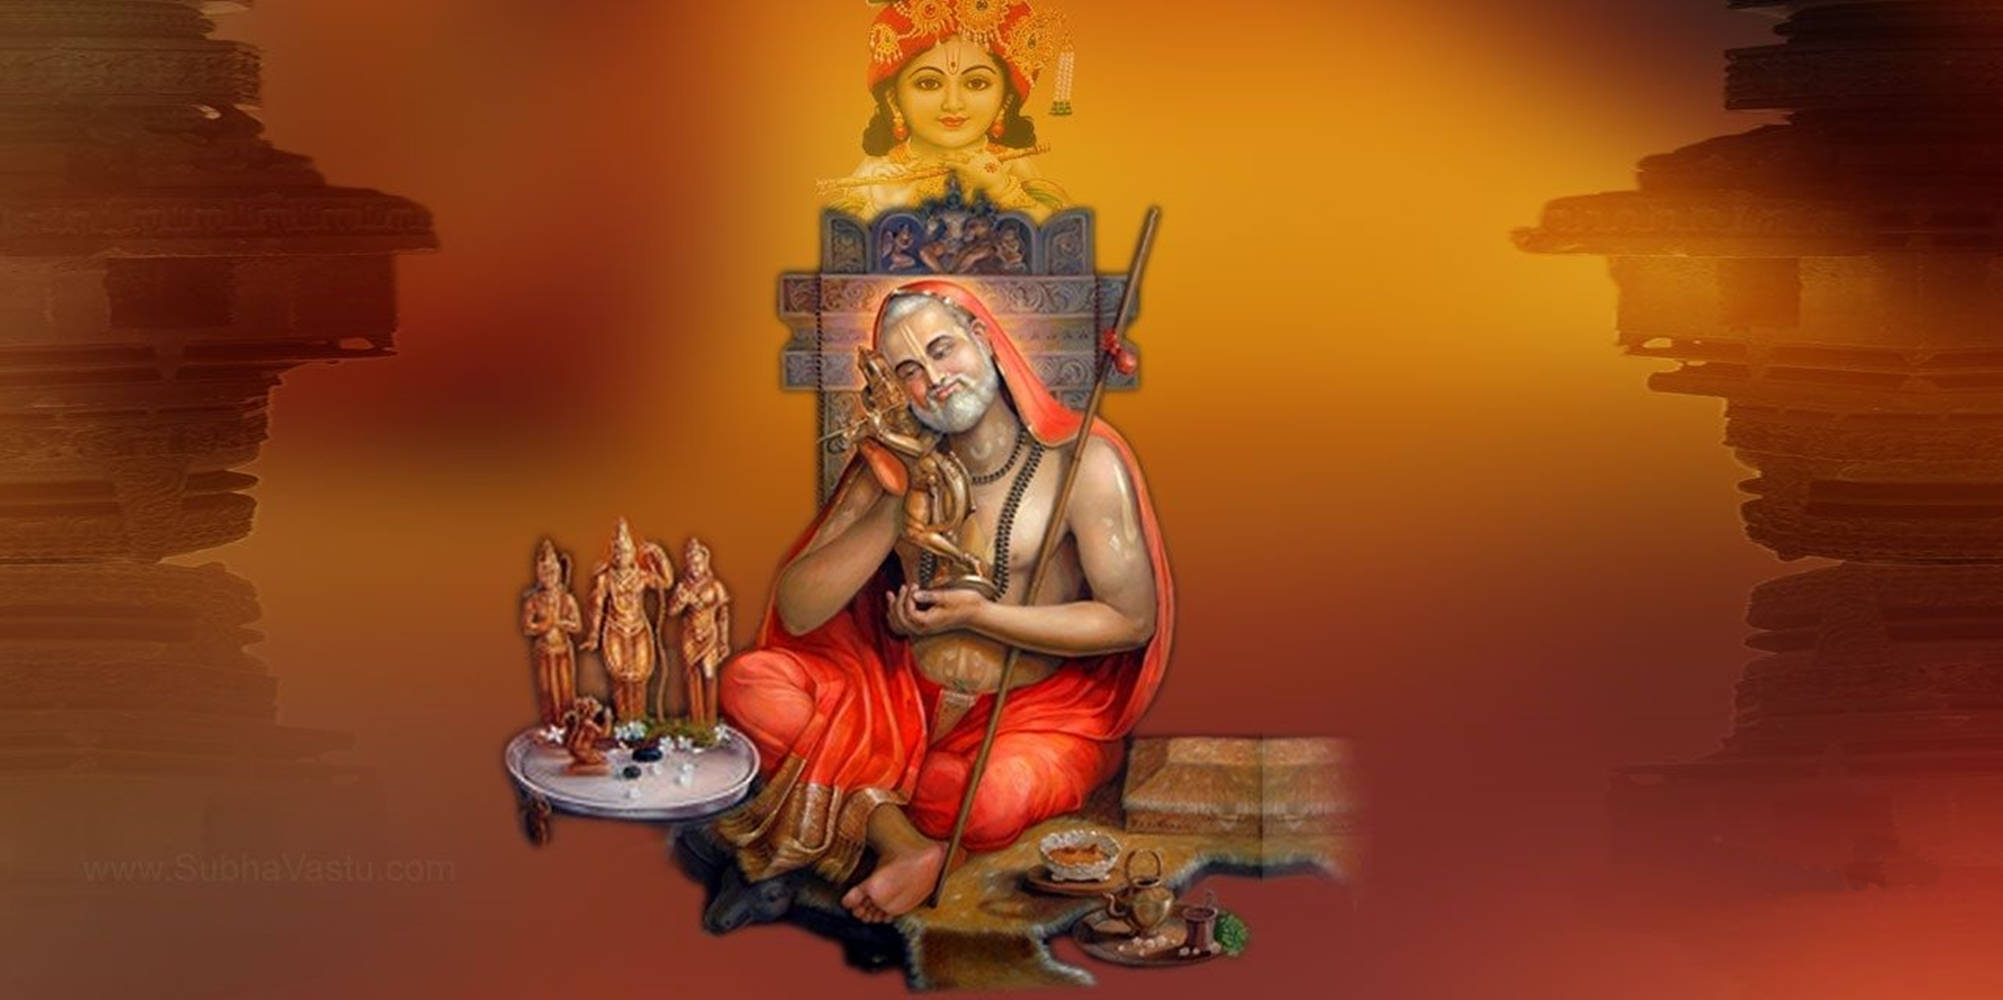 Serene Divine Scene - Lord Raghavendra Surrounded By Sacred Indian Statues. Background